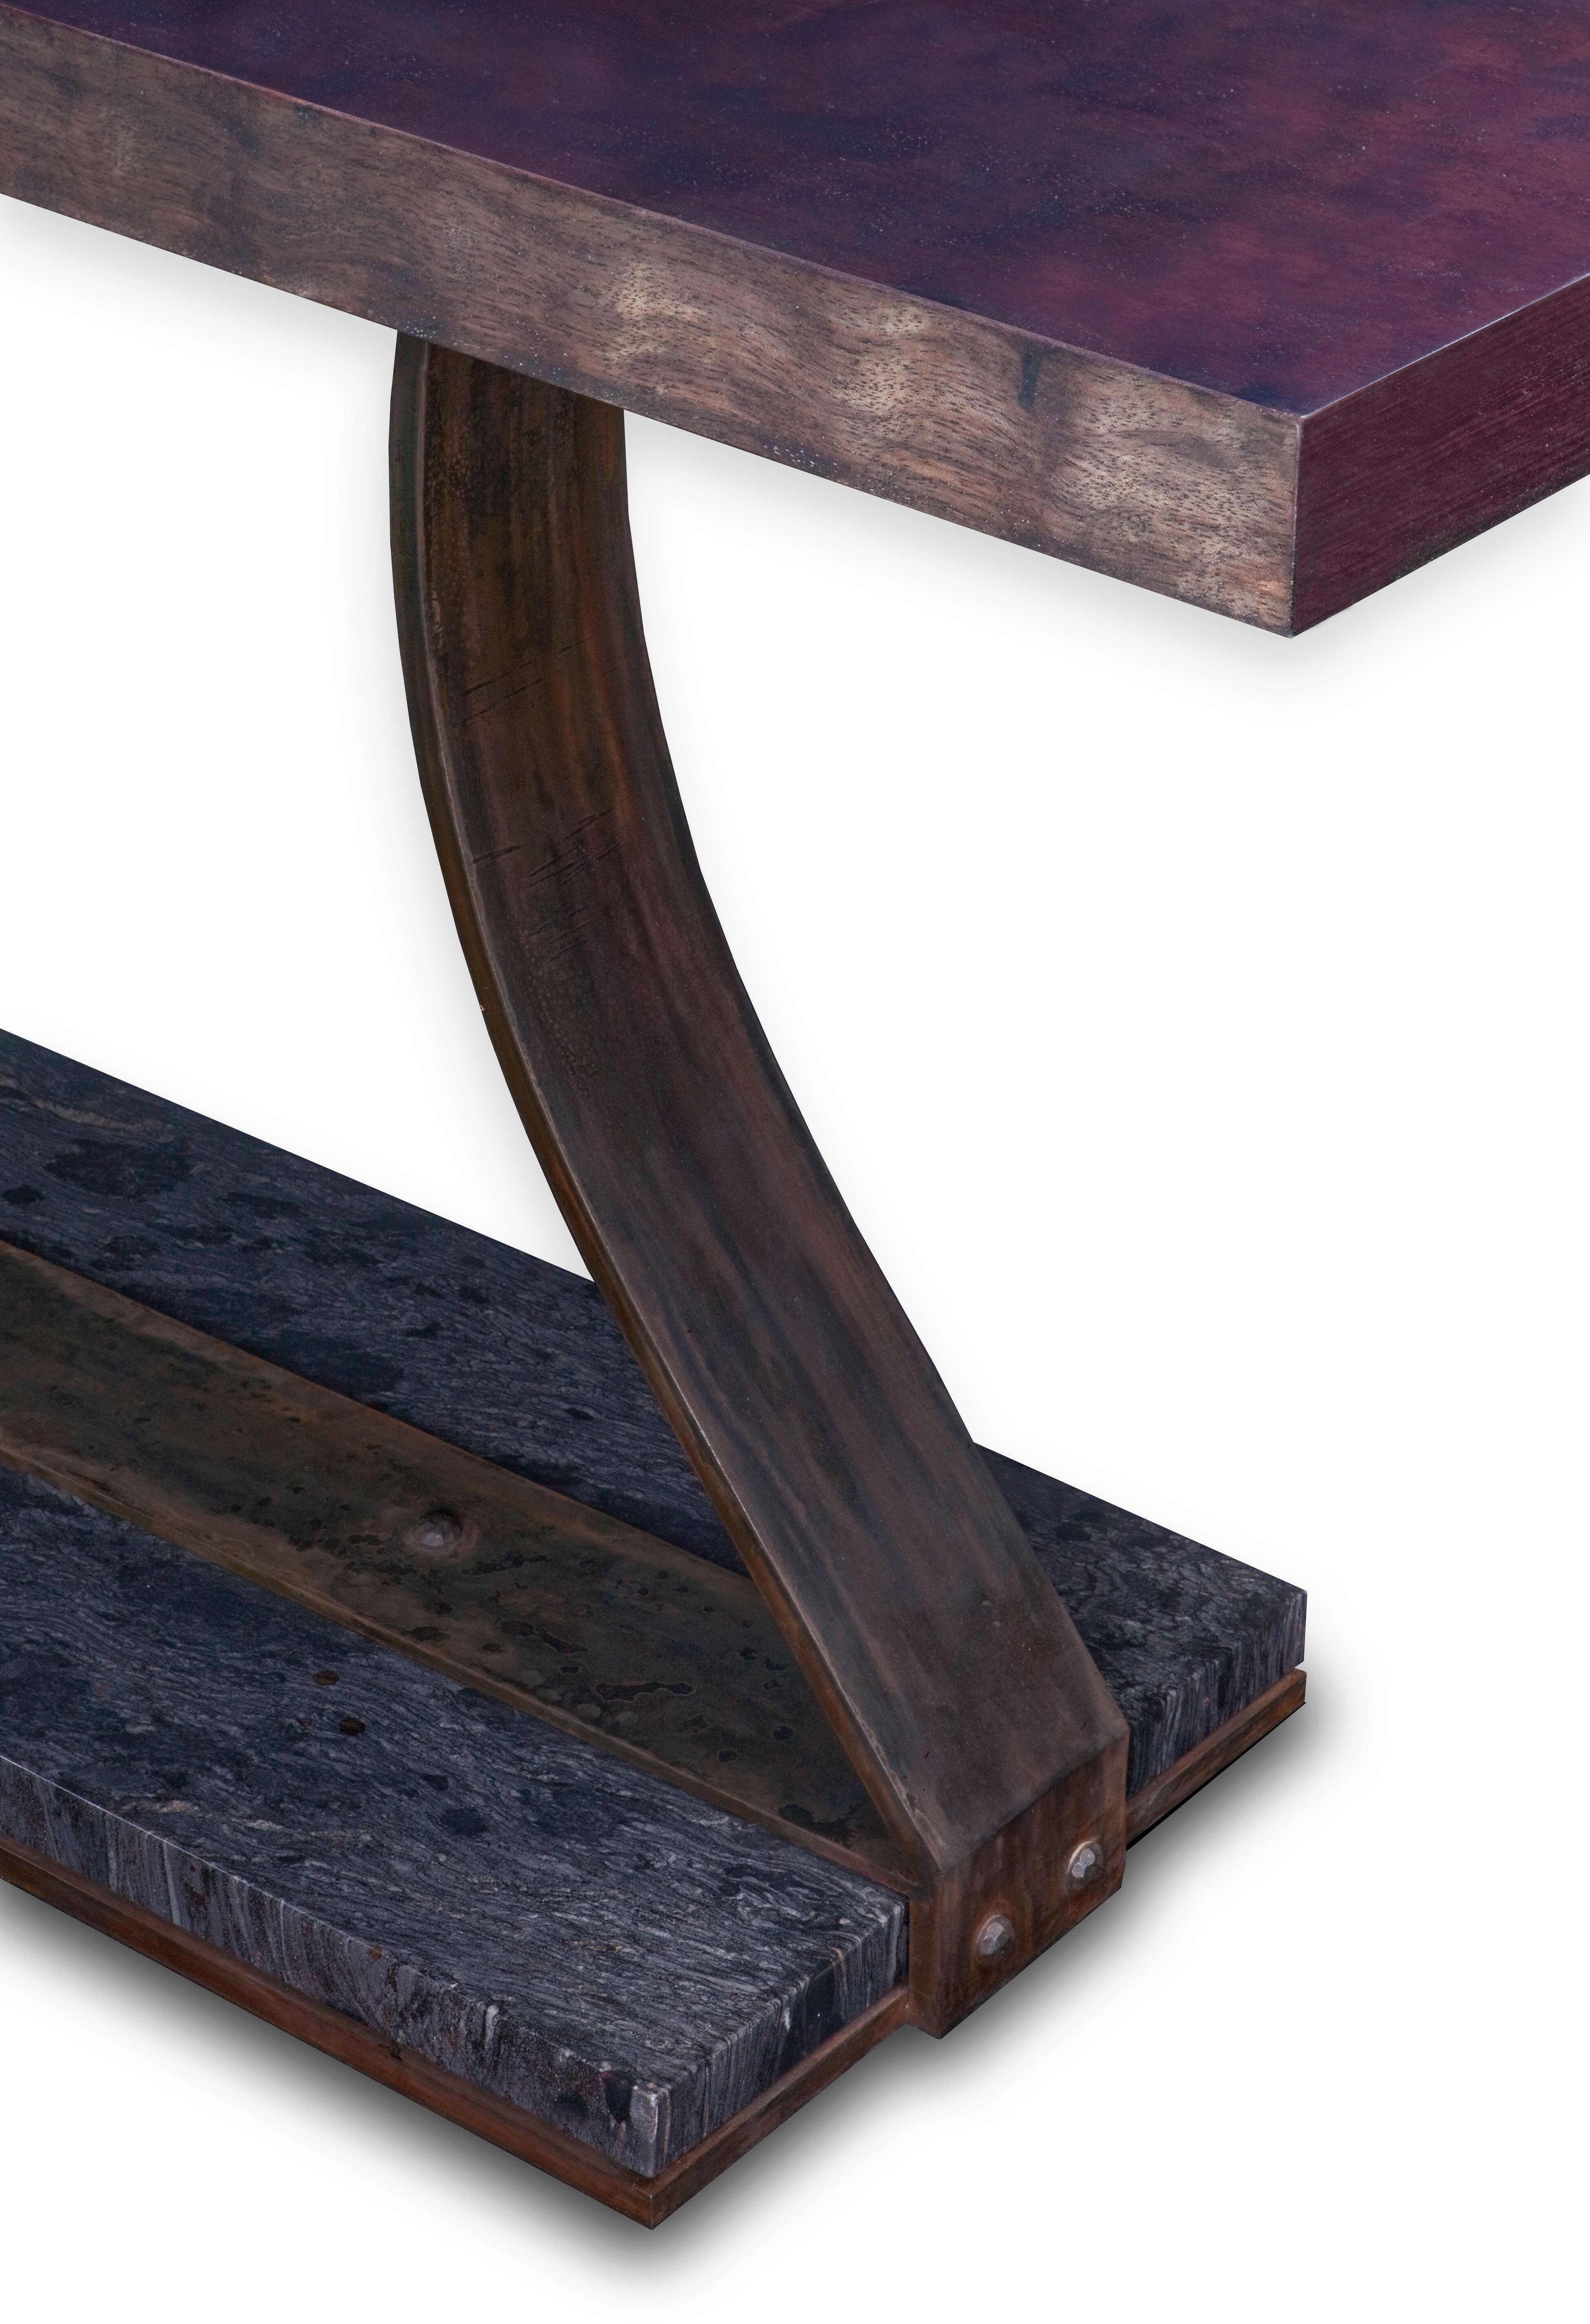 Exotic Bubinga wood top, patinated hand forged steel base which envelopes a heavy slab of granite. A very minimal base for optimal leg room and seating. One of a kind piece available or custom orders available.